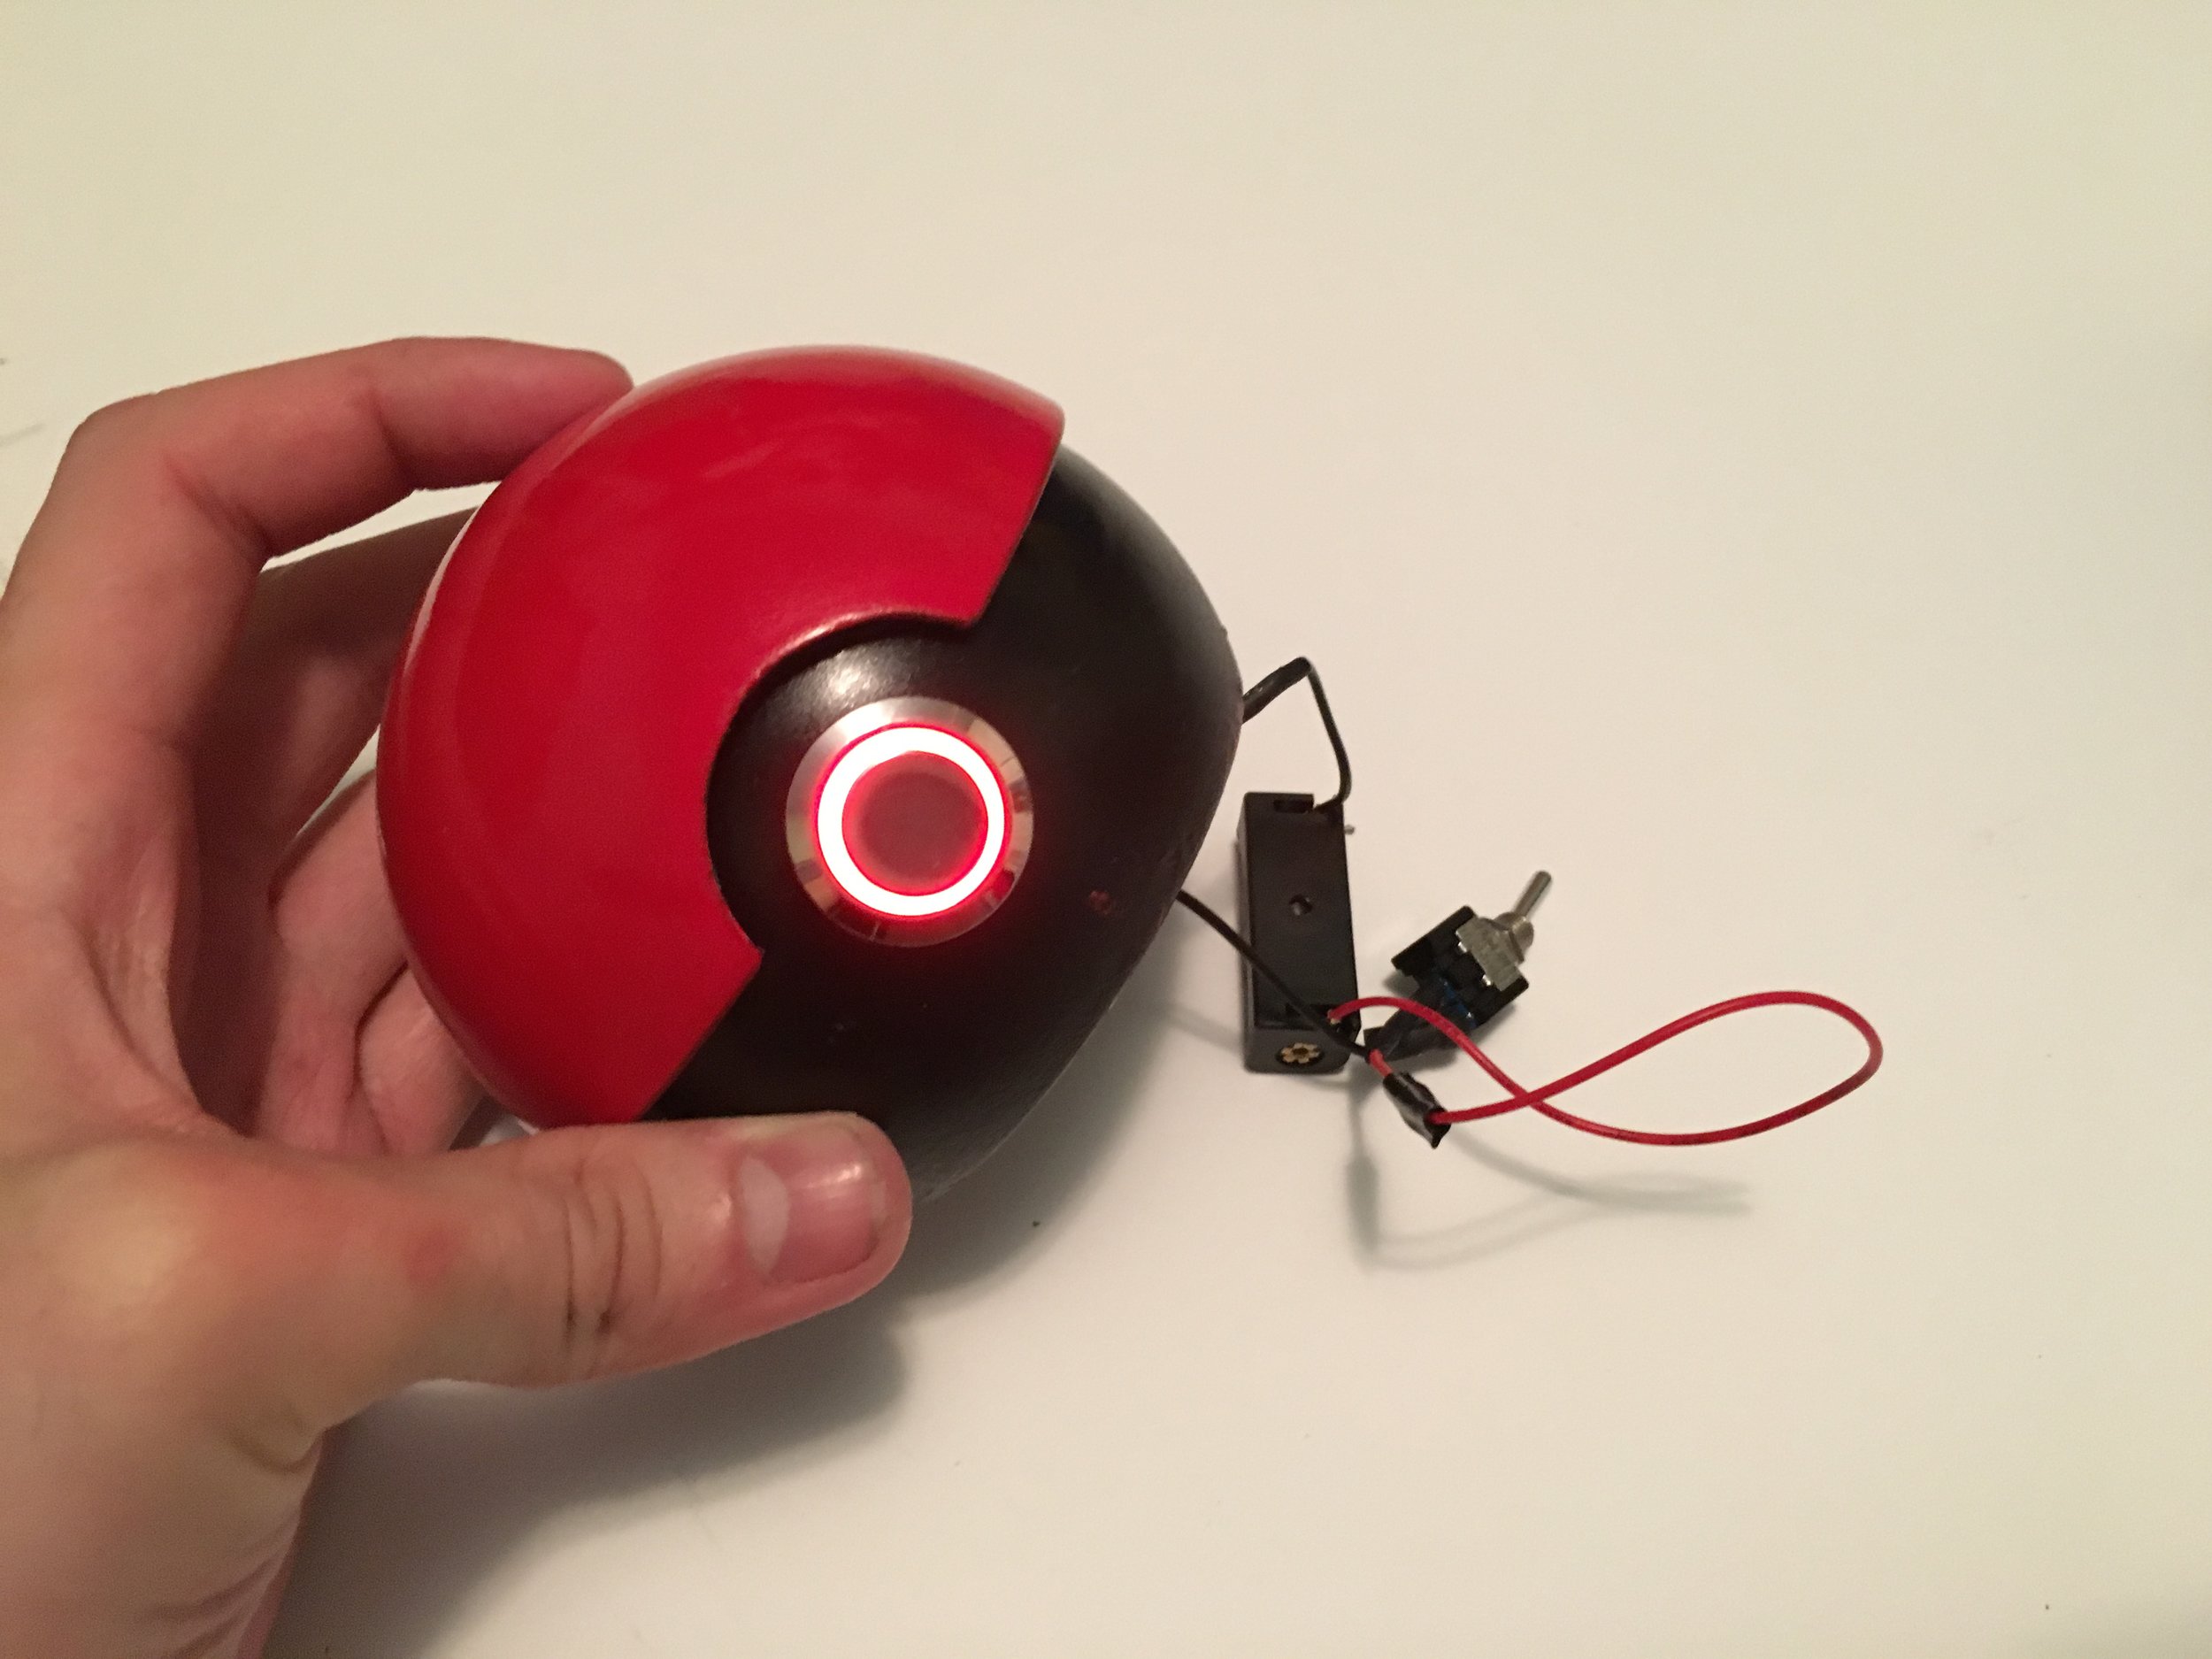 3D Printed Pokeball Pikachu Functional Pokemon by 3DProject RM